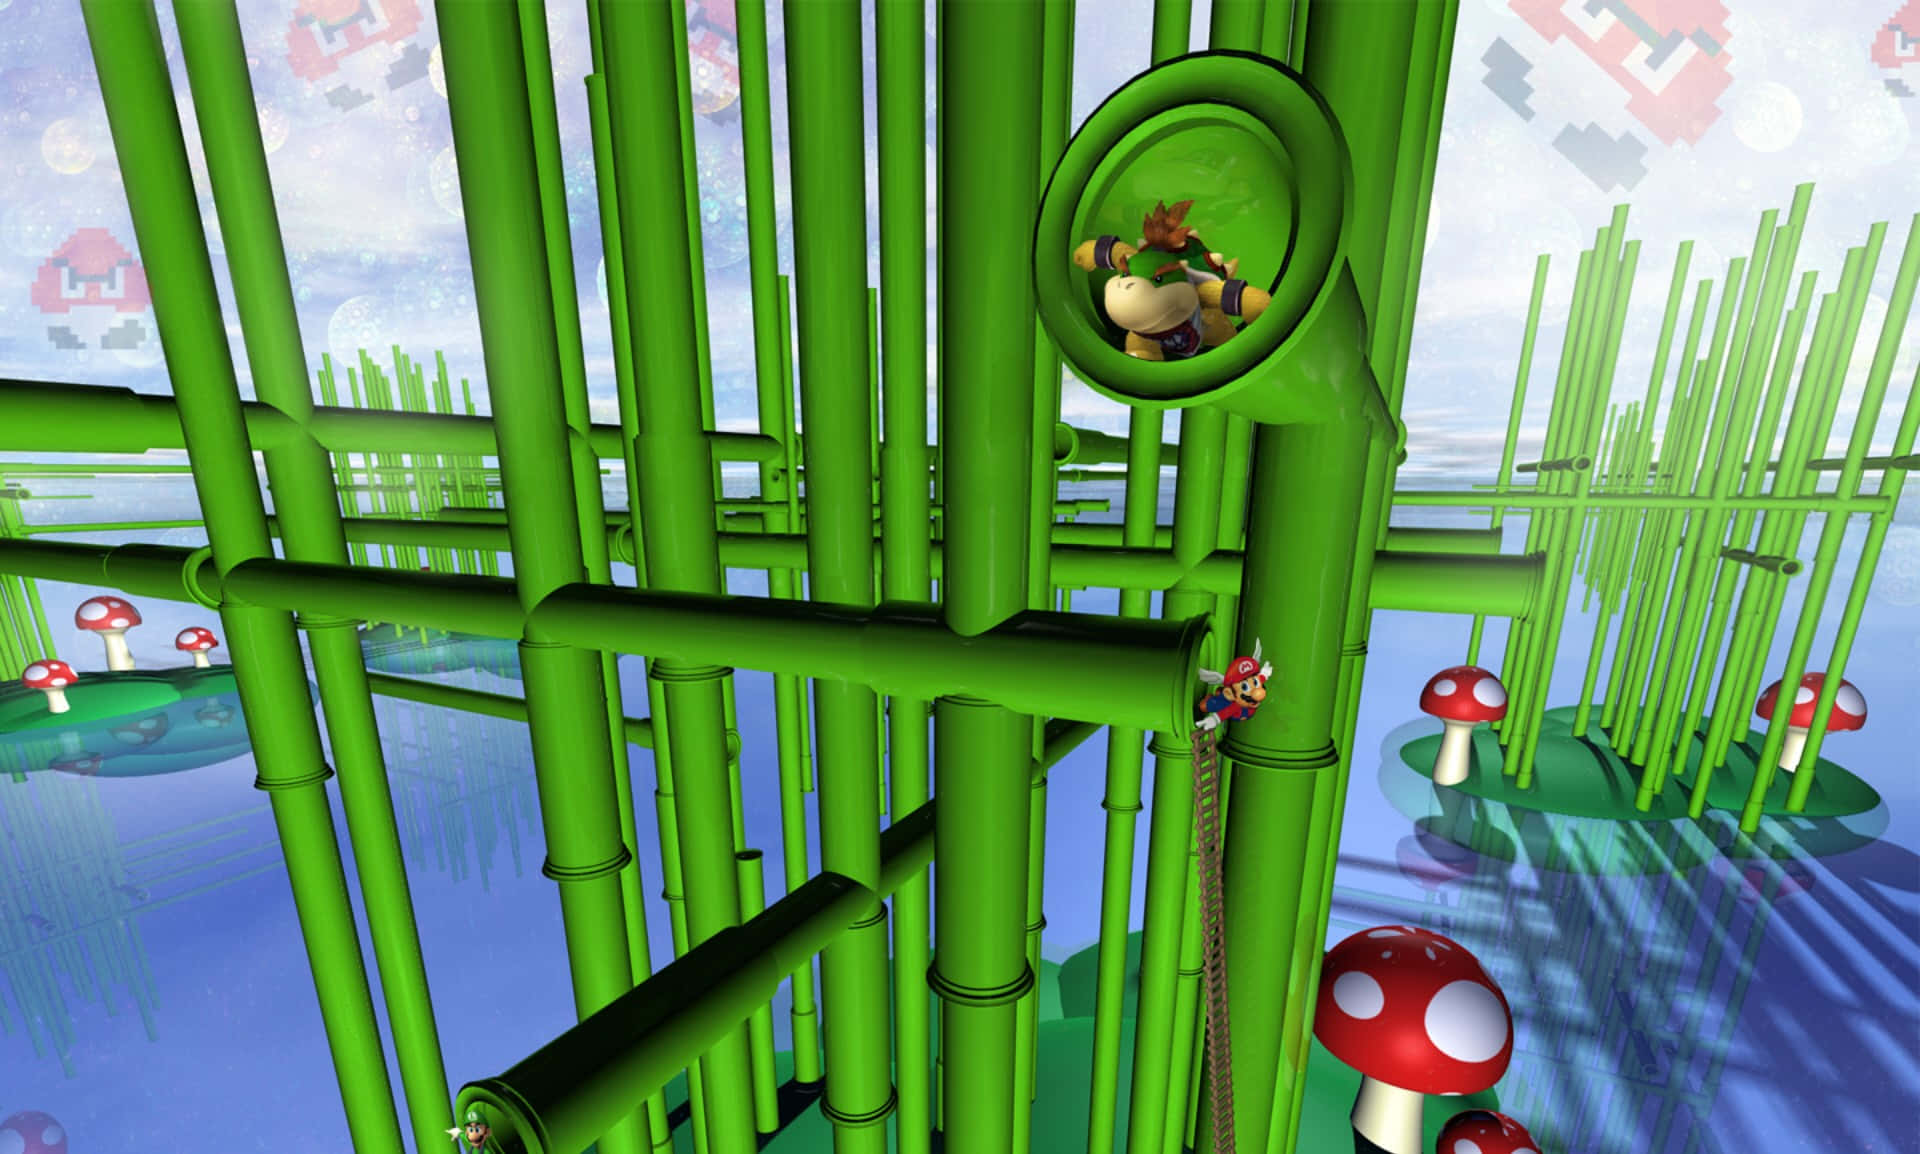 Experience a world of adventure with Super Mario 3D Wallpaper